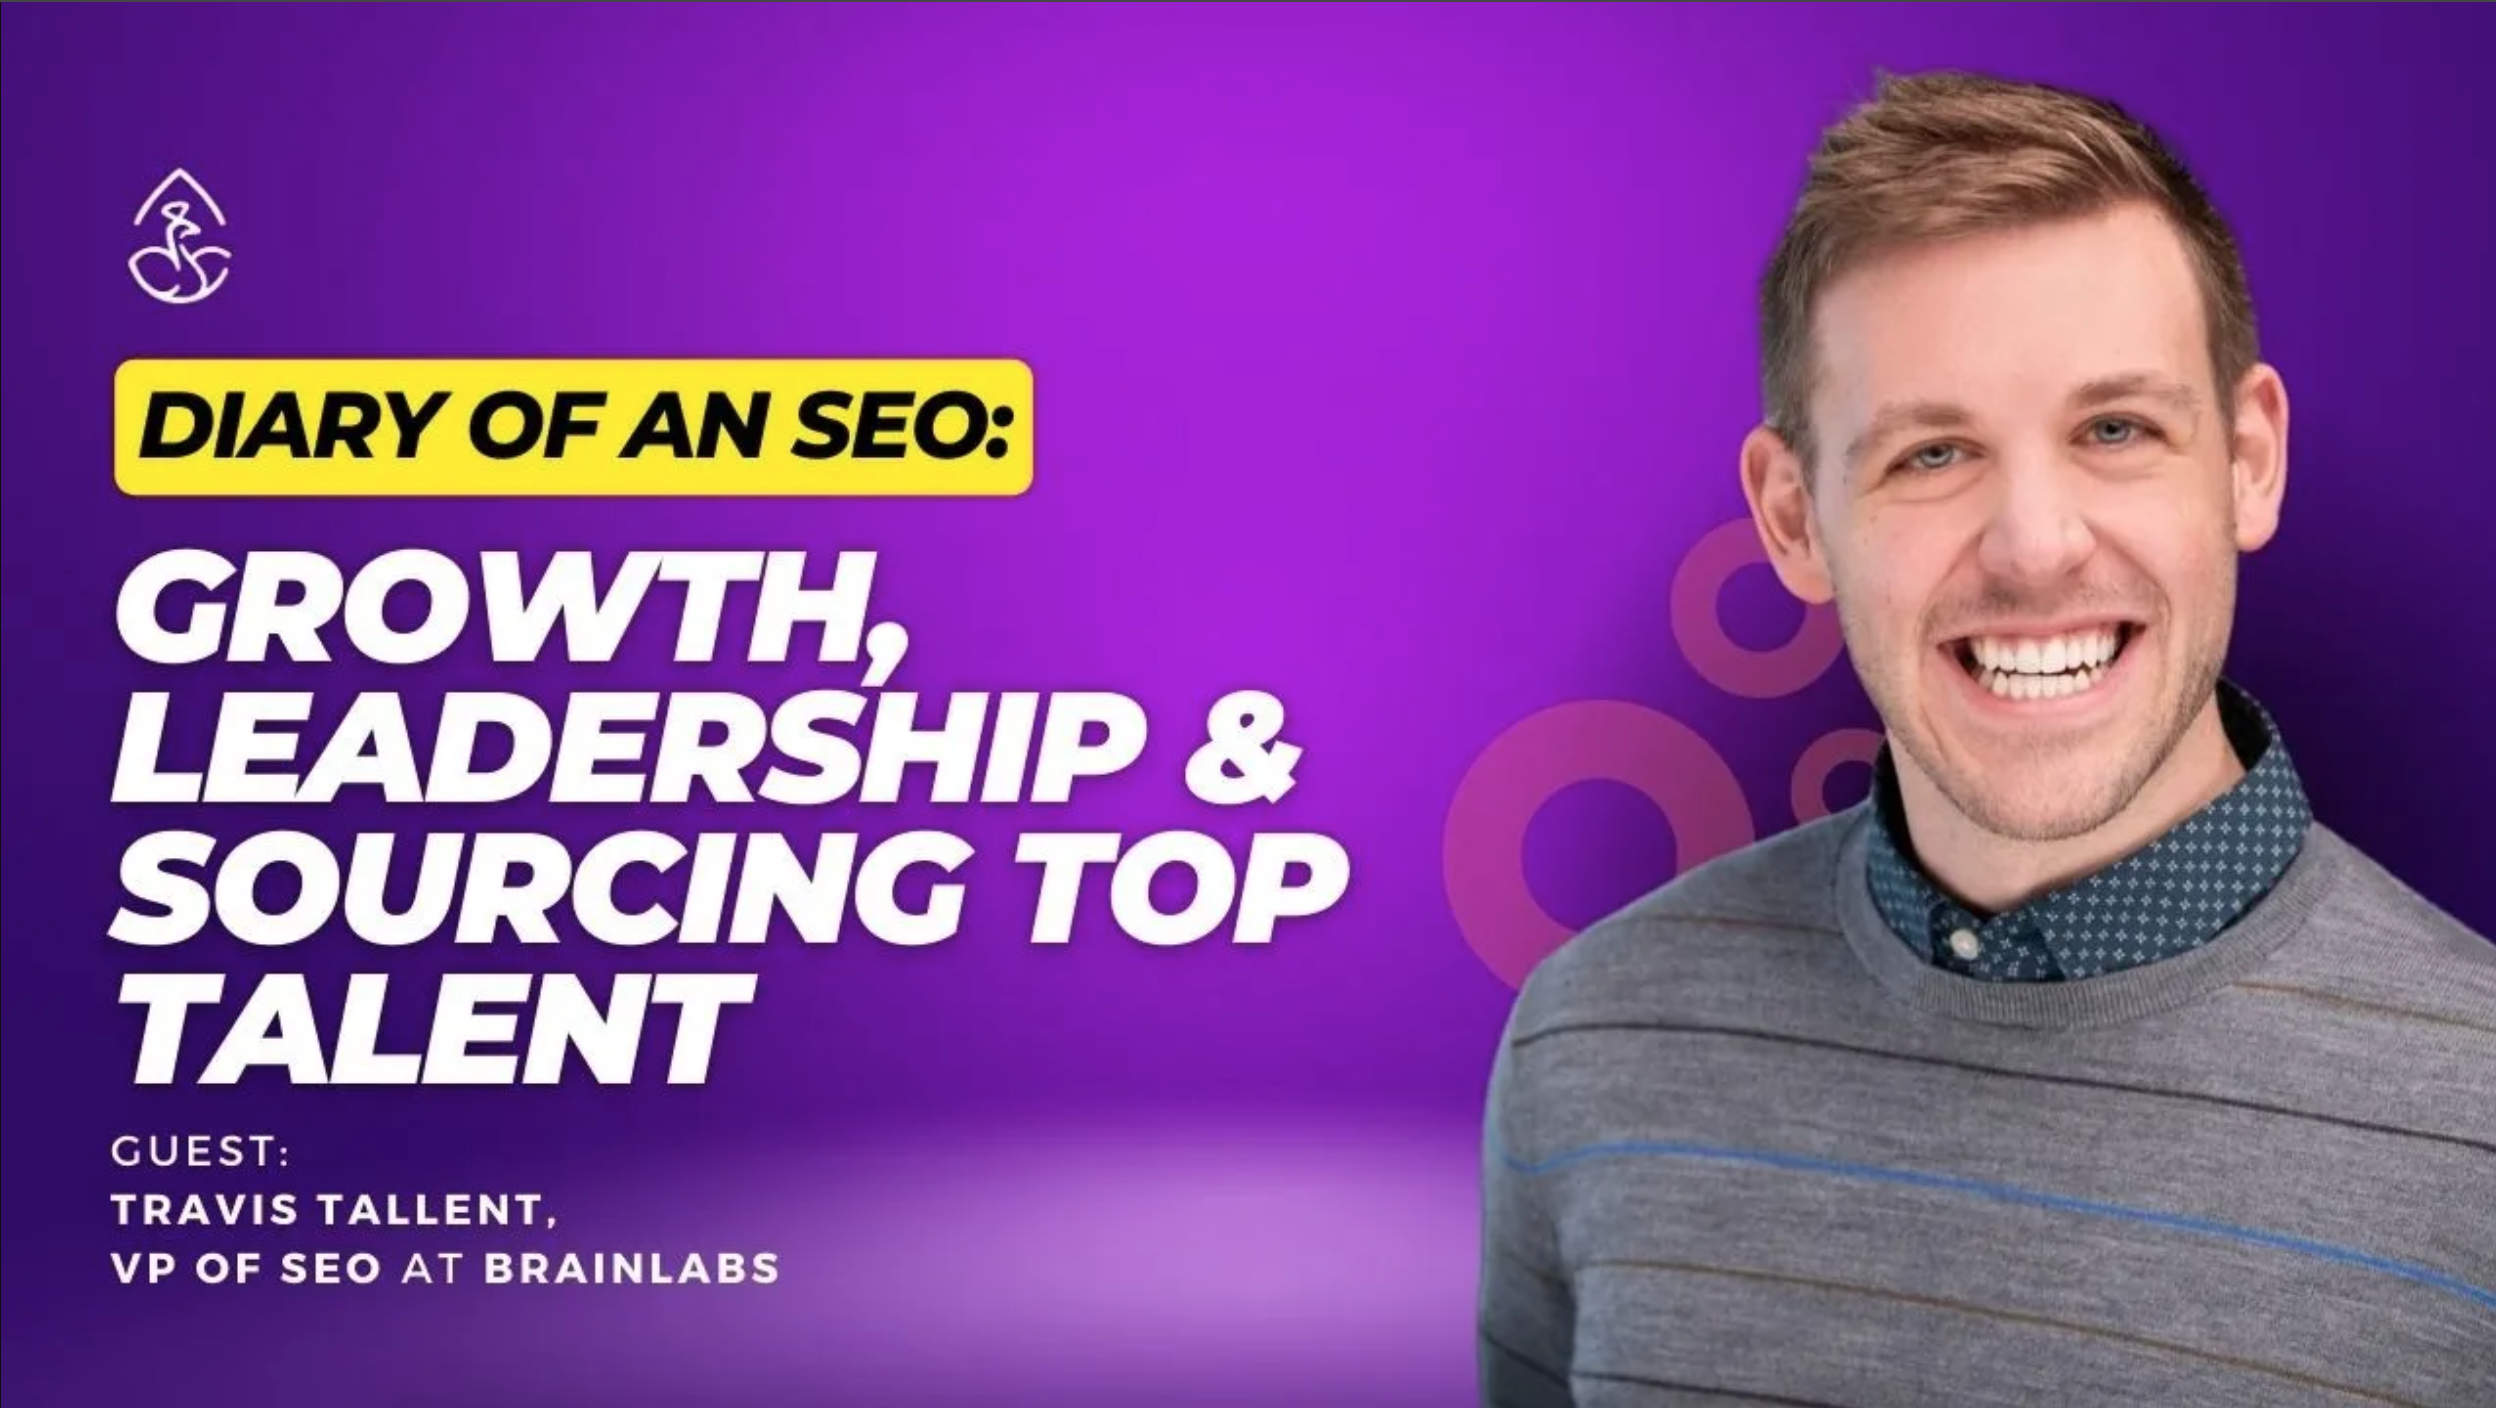 BrainLabs' VP of SEO joins SEO for Hire to discuss growth and leadership